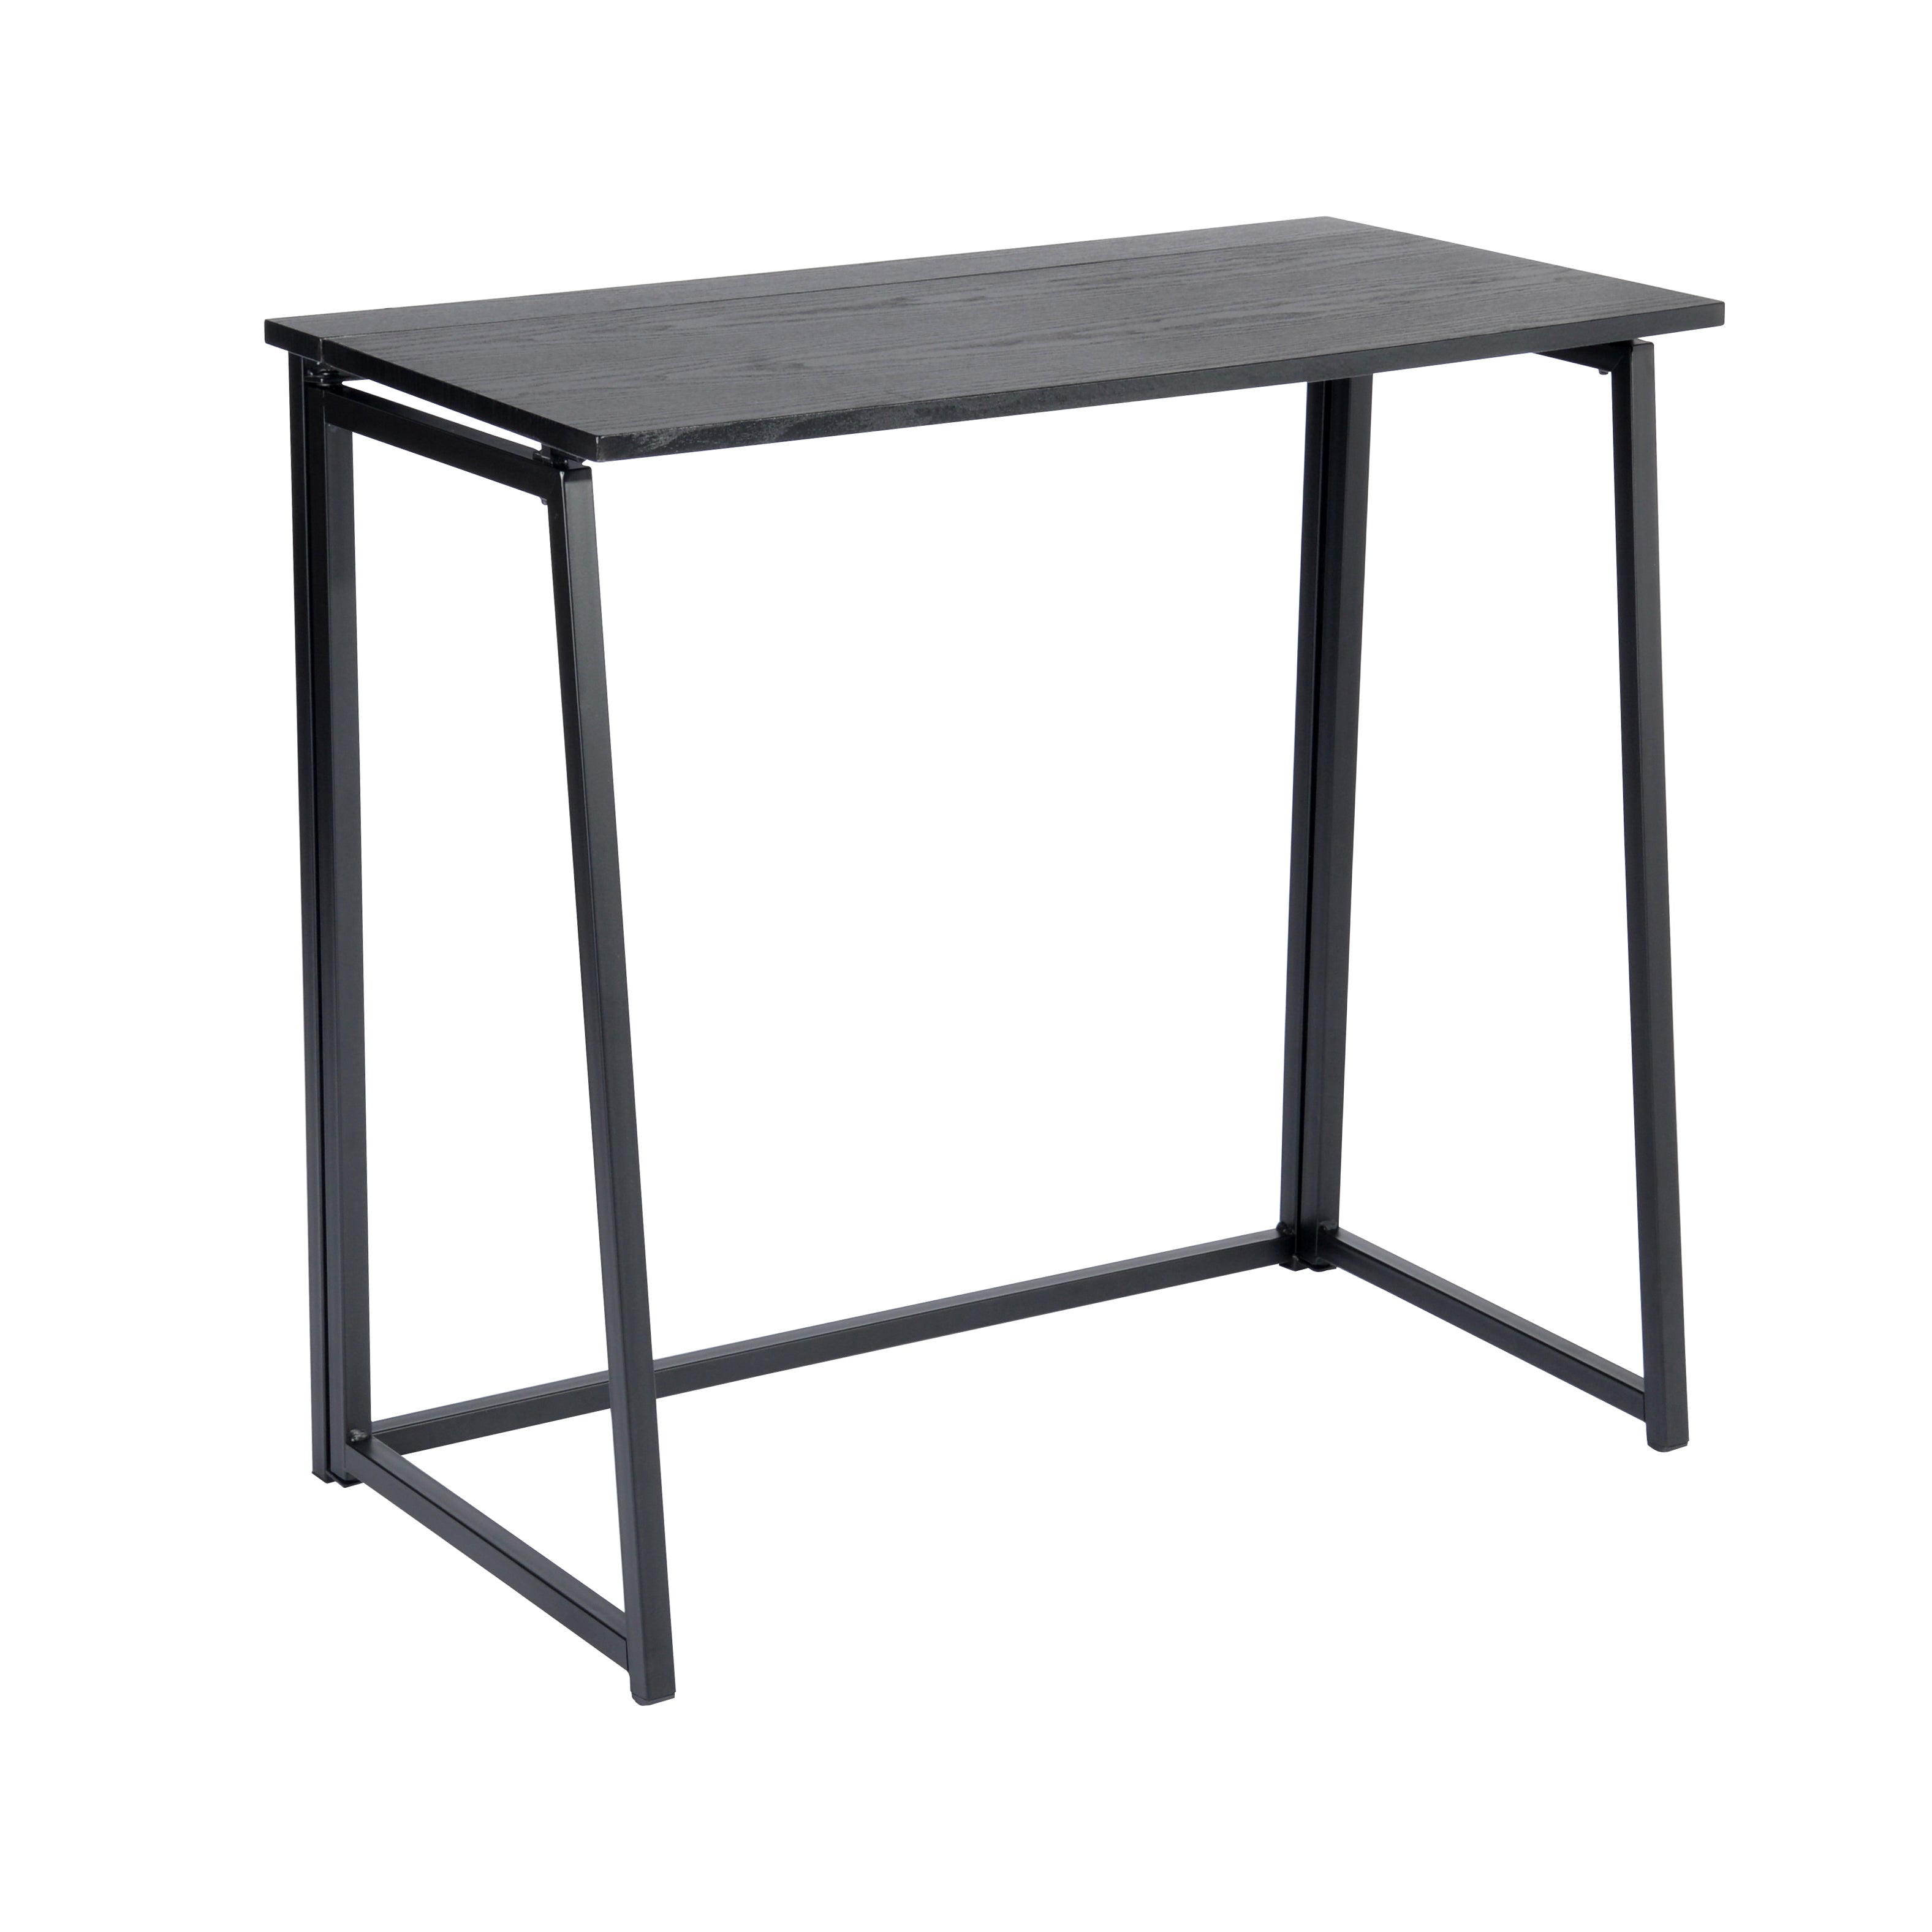 Folding desk in oak and metal perfect for small spaces and students - ASCOLI